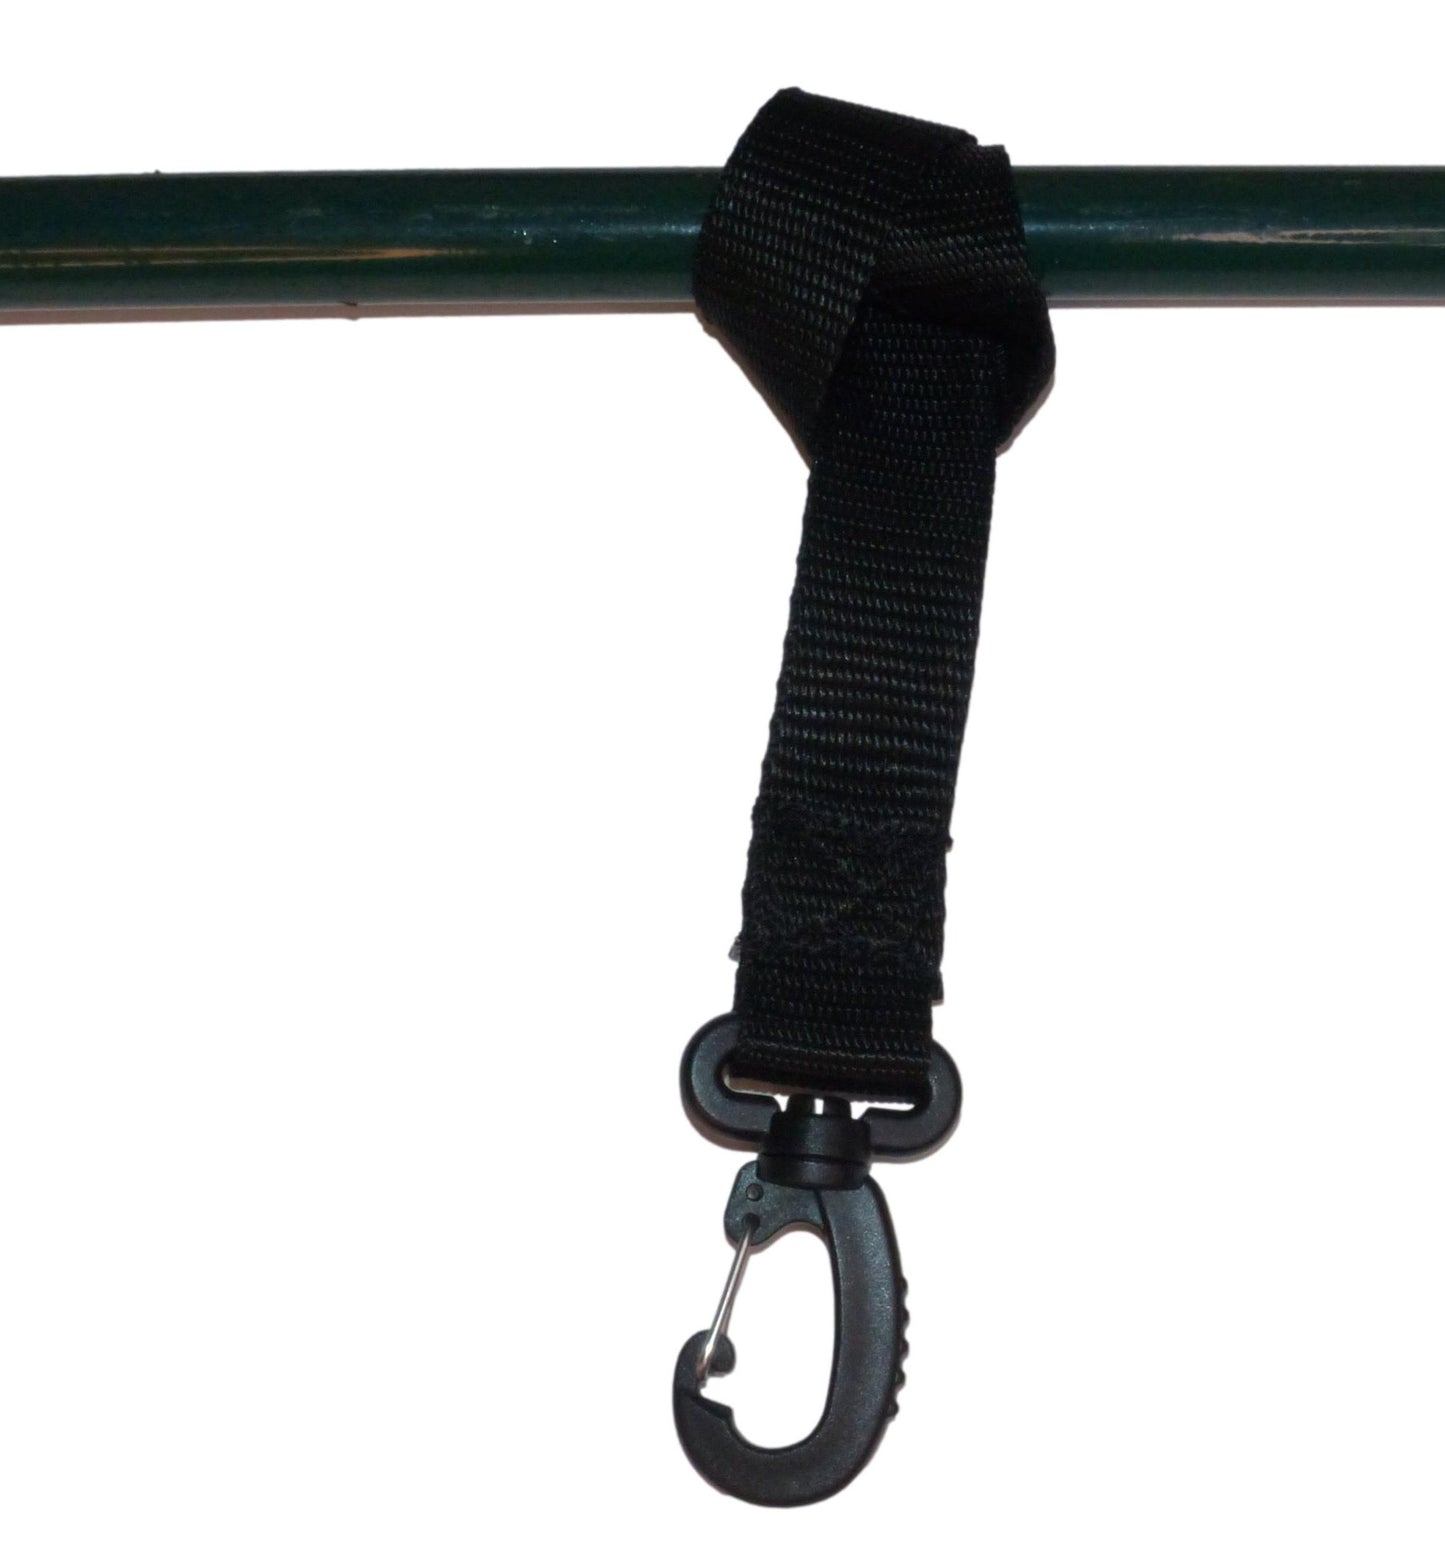 Benristraps 25mm Buggy Handle Carry Strap in black on handle